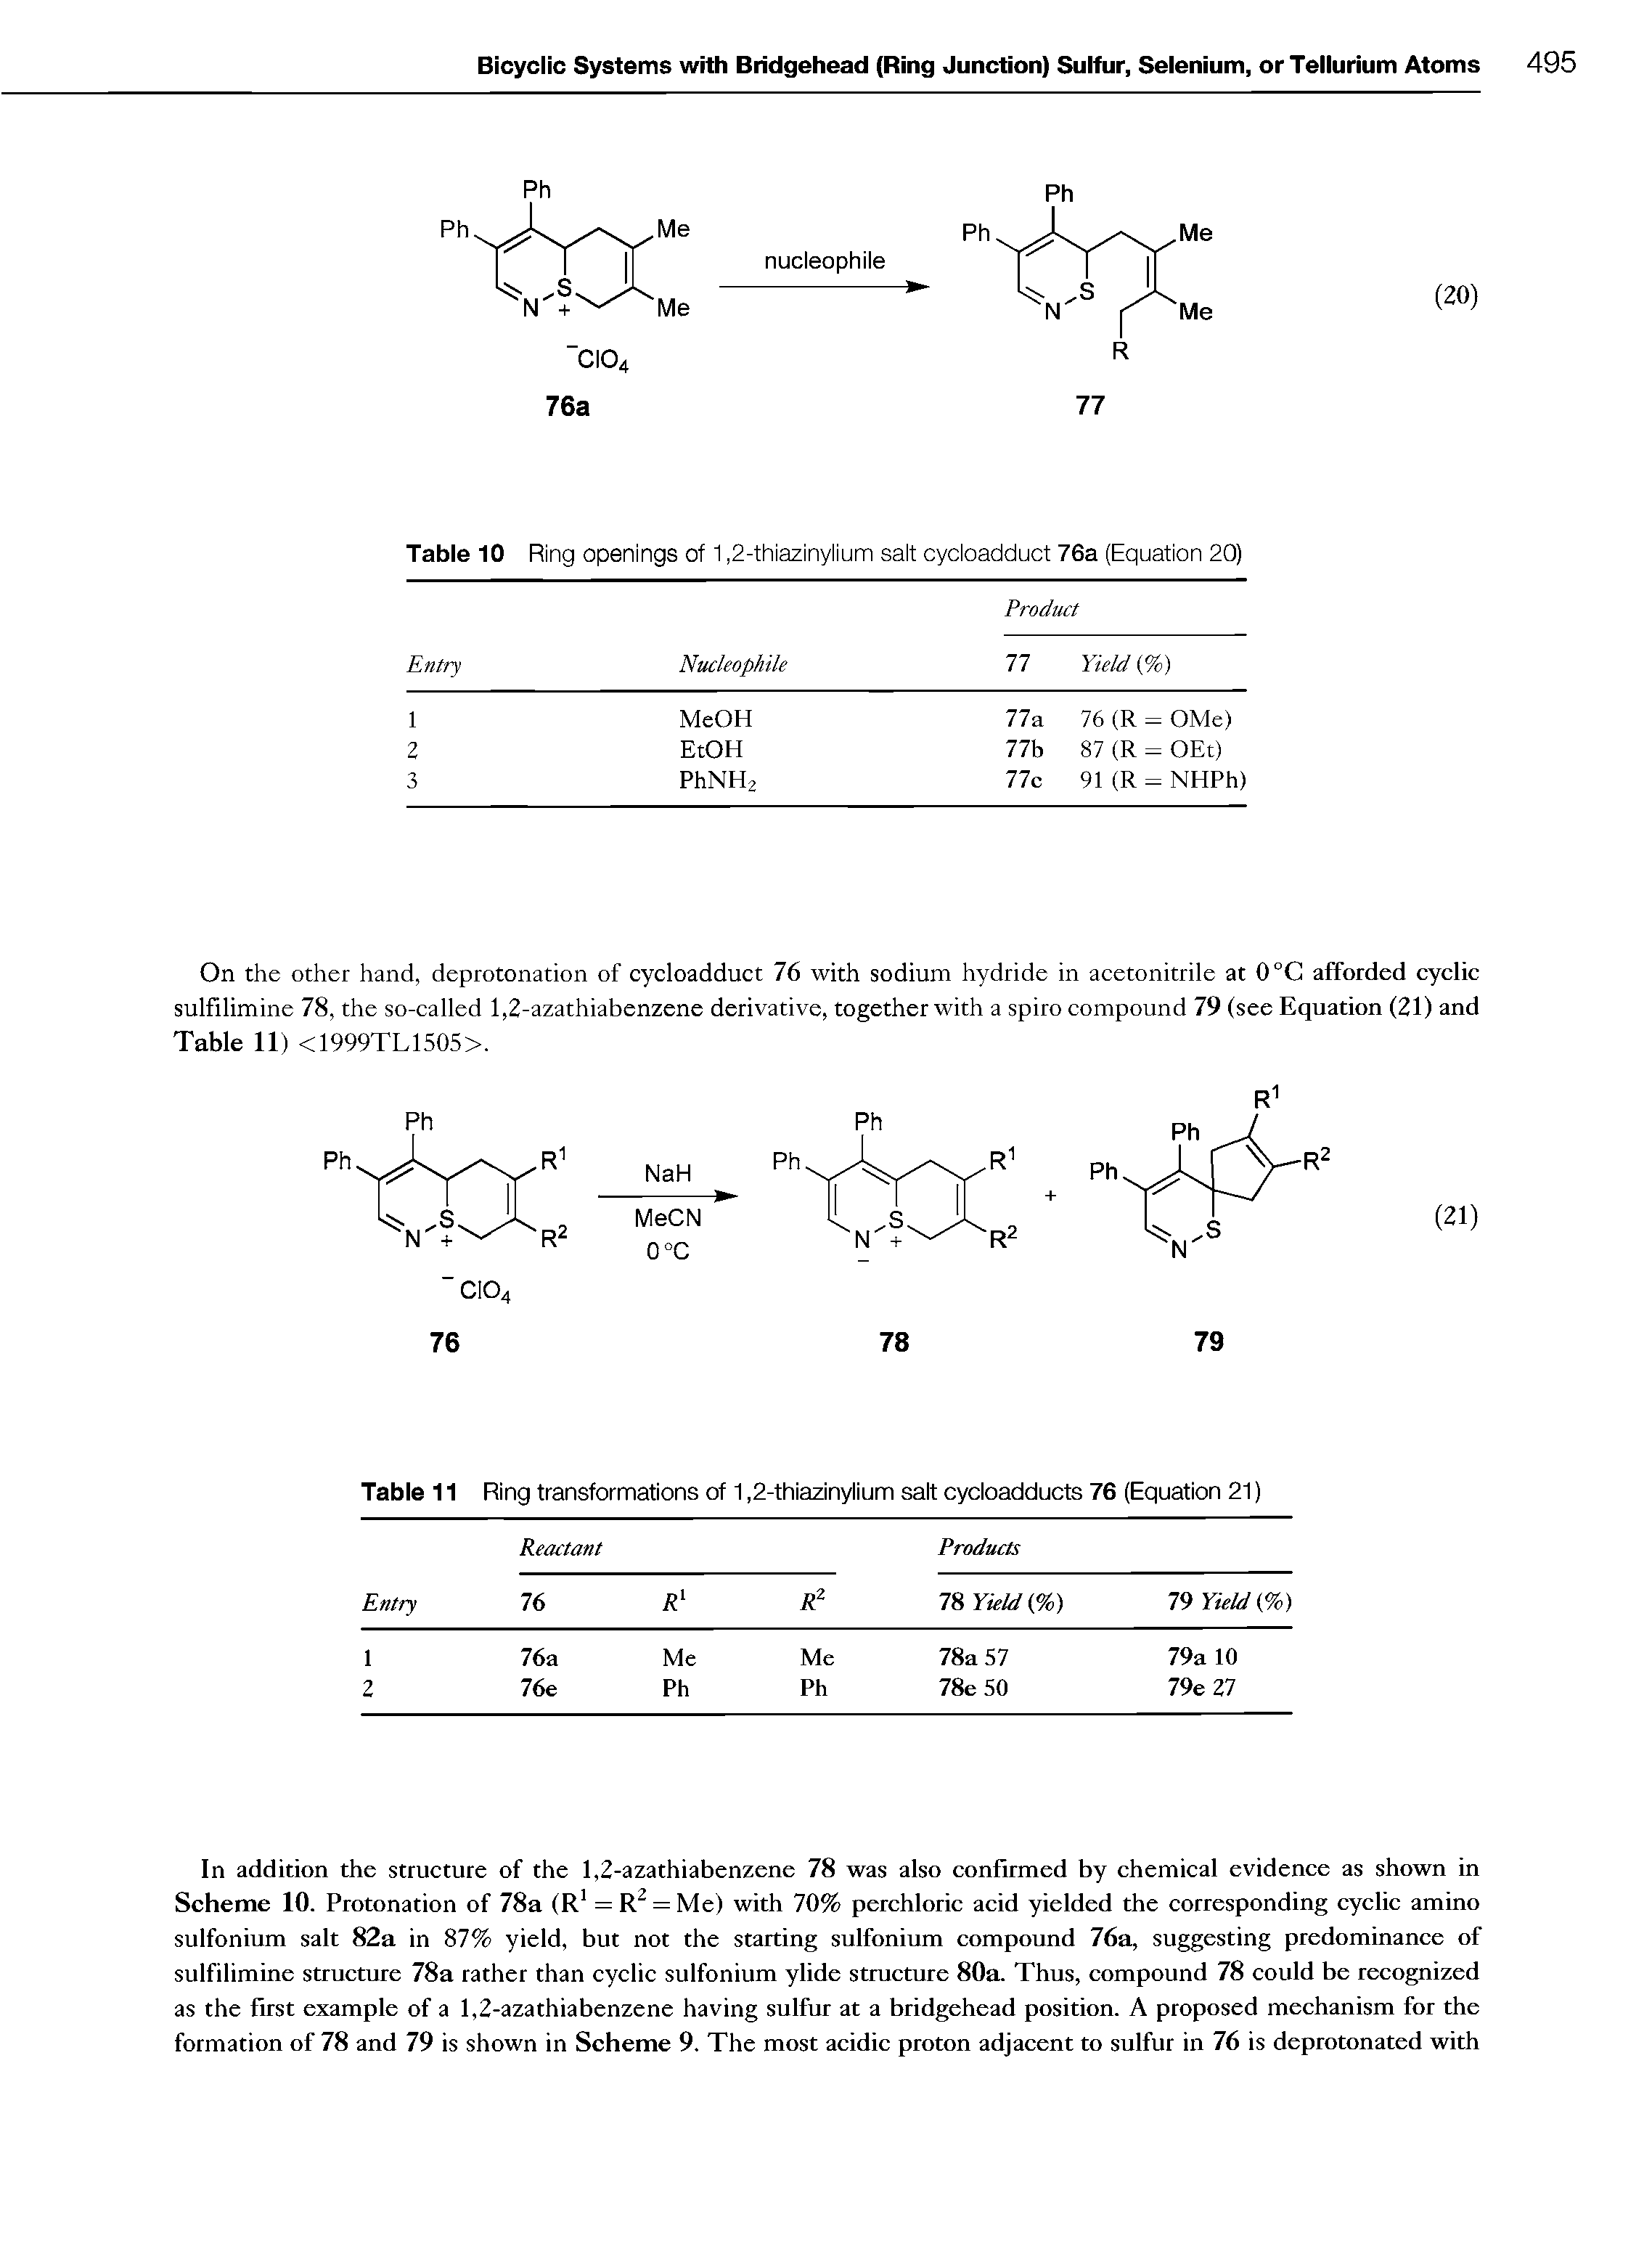 Table 10 Ring openings of 1,2-thiazinylium salt cycloadduct 76a (Equation 20)...